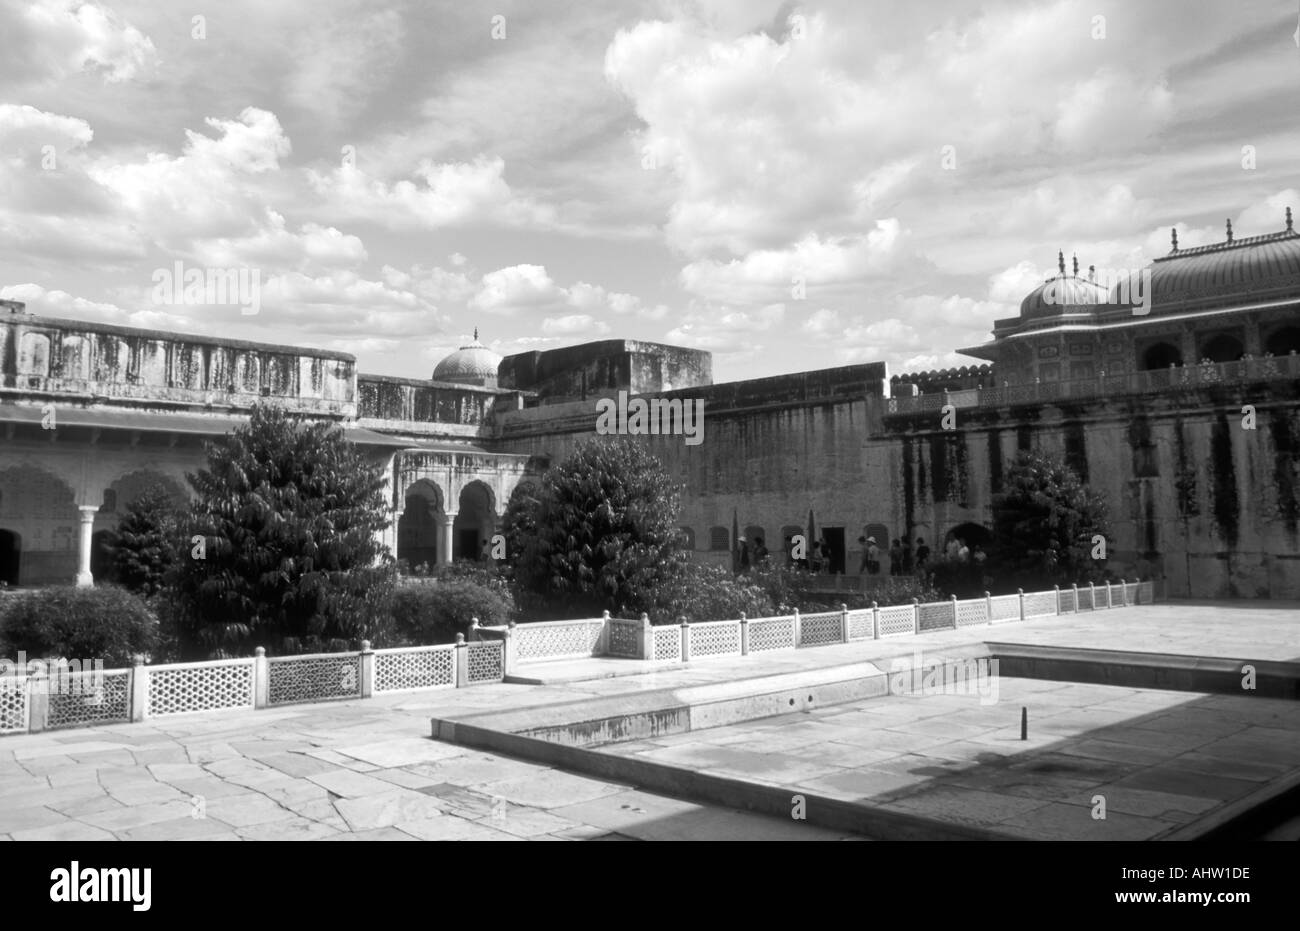 Historic place in india Black and White Stock Photos & Images - Alamy